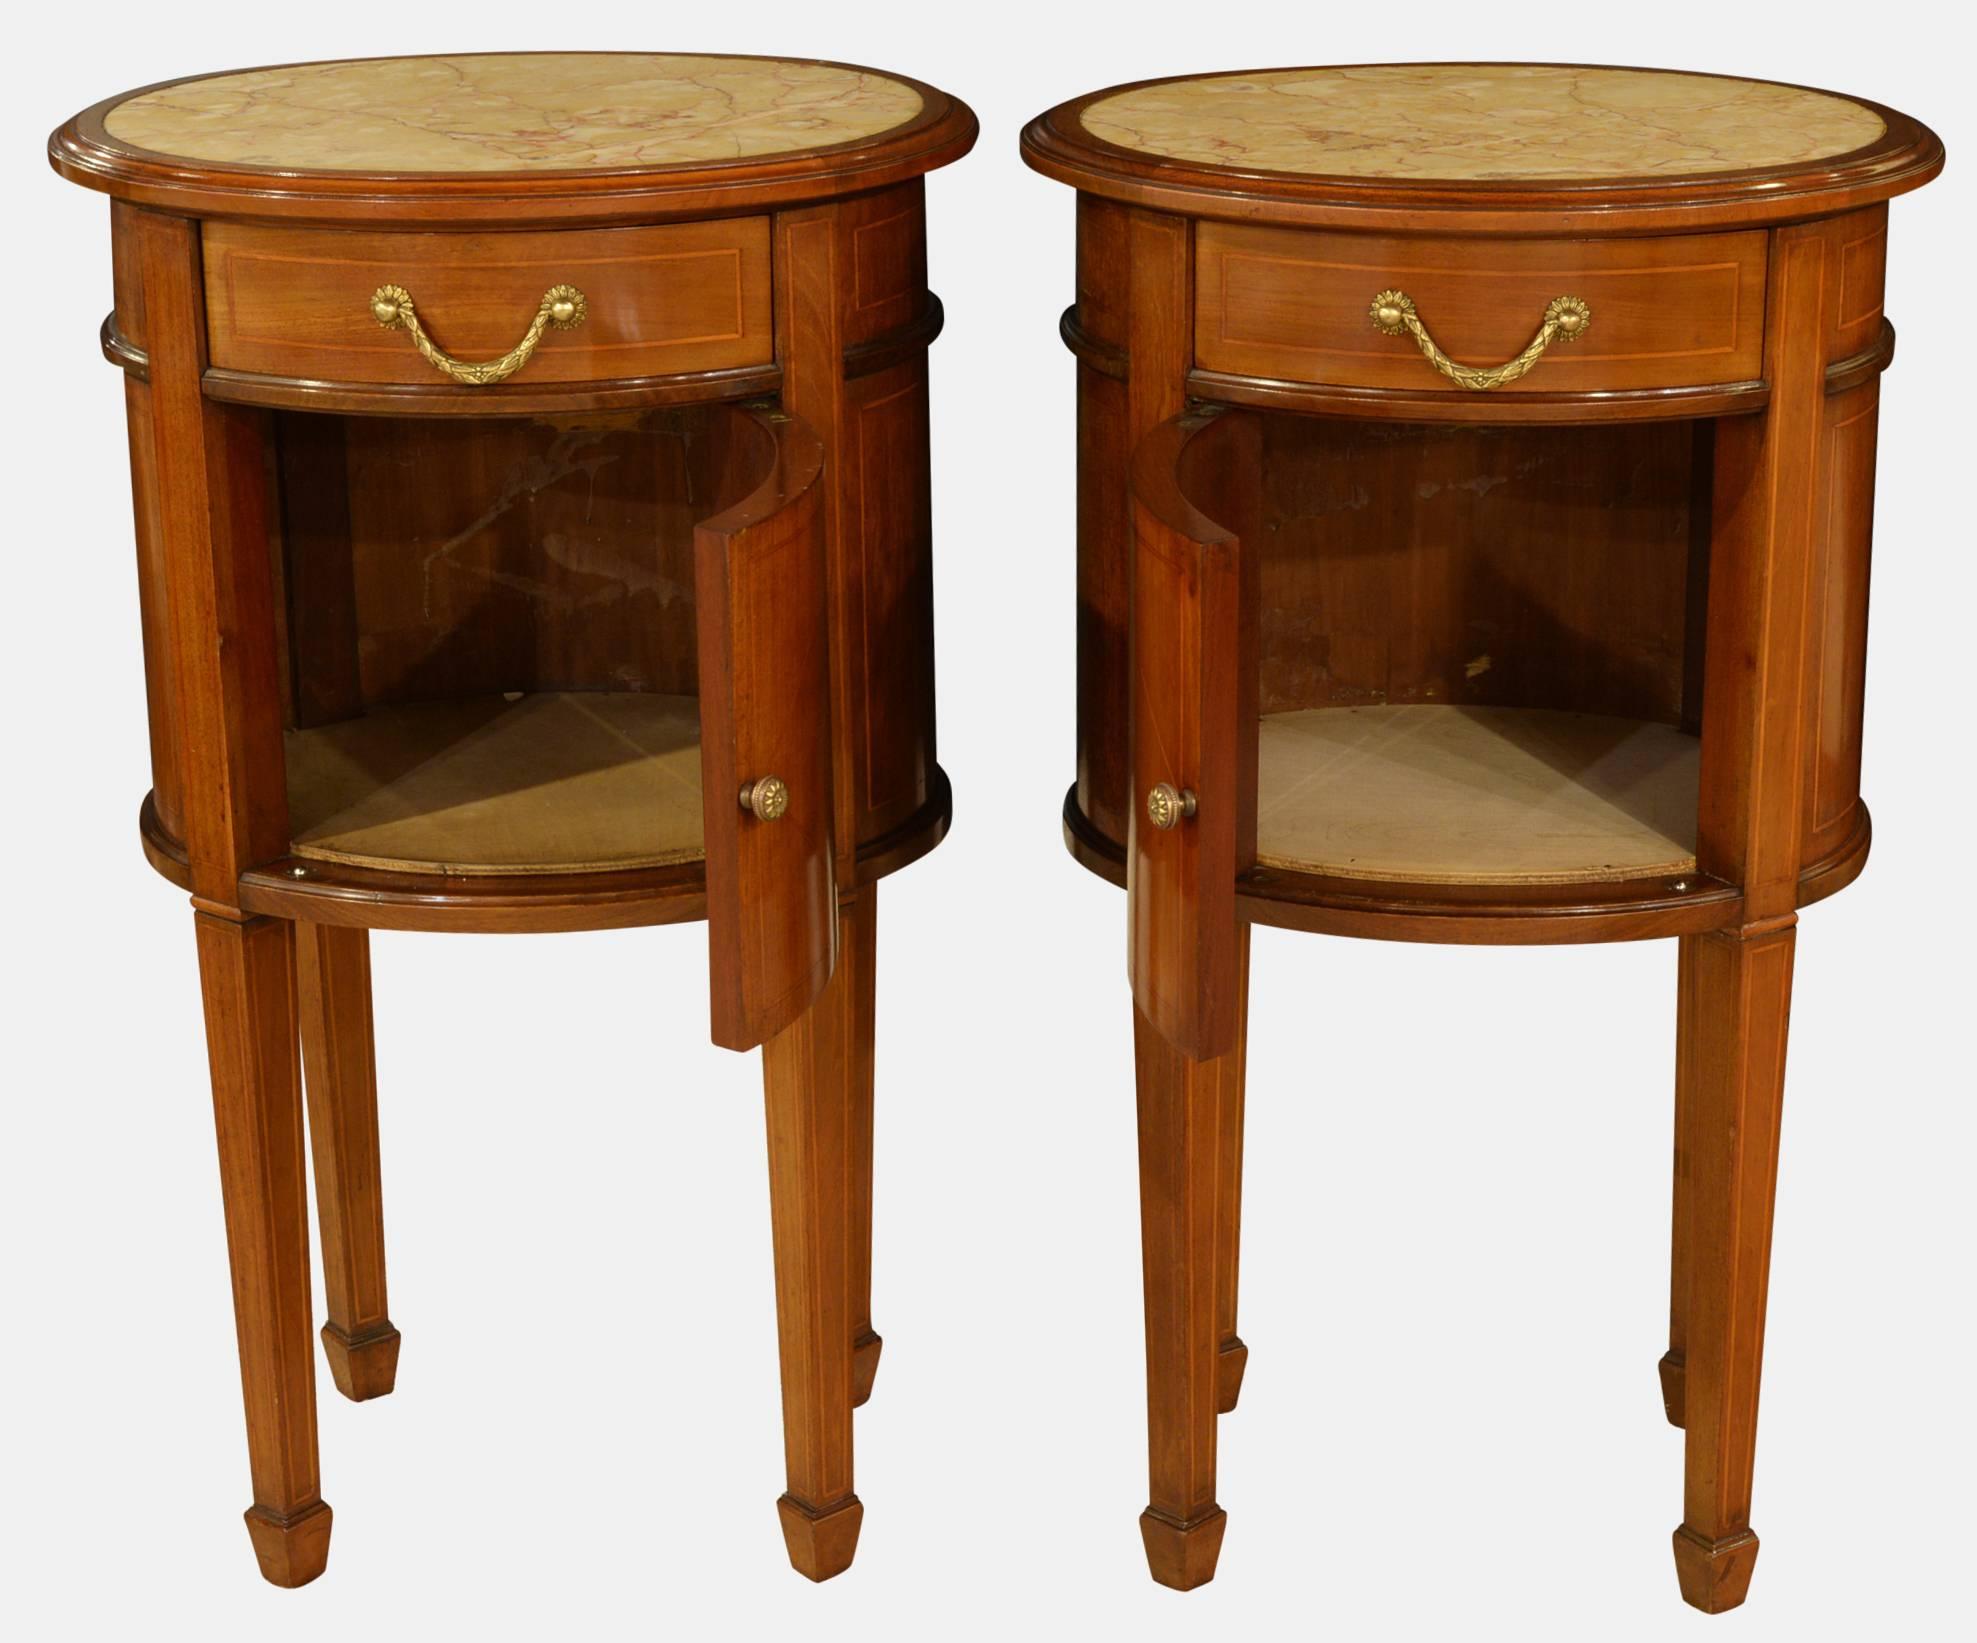 A pair of mahogany, oval line, inlaid bedside chests with inset marble tops,

circa 1900.